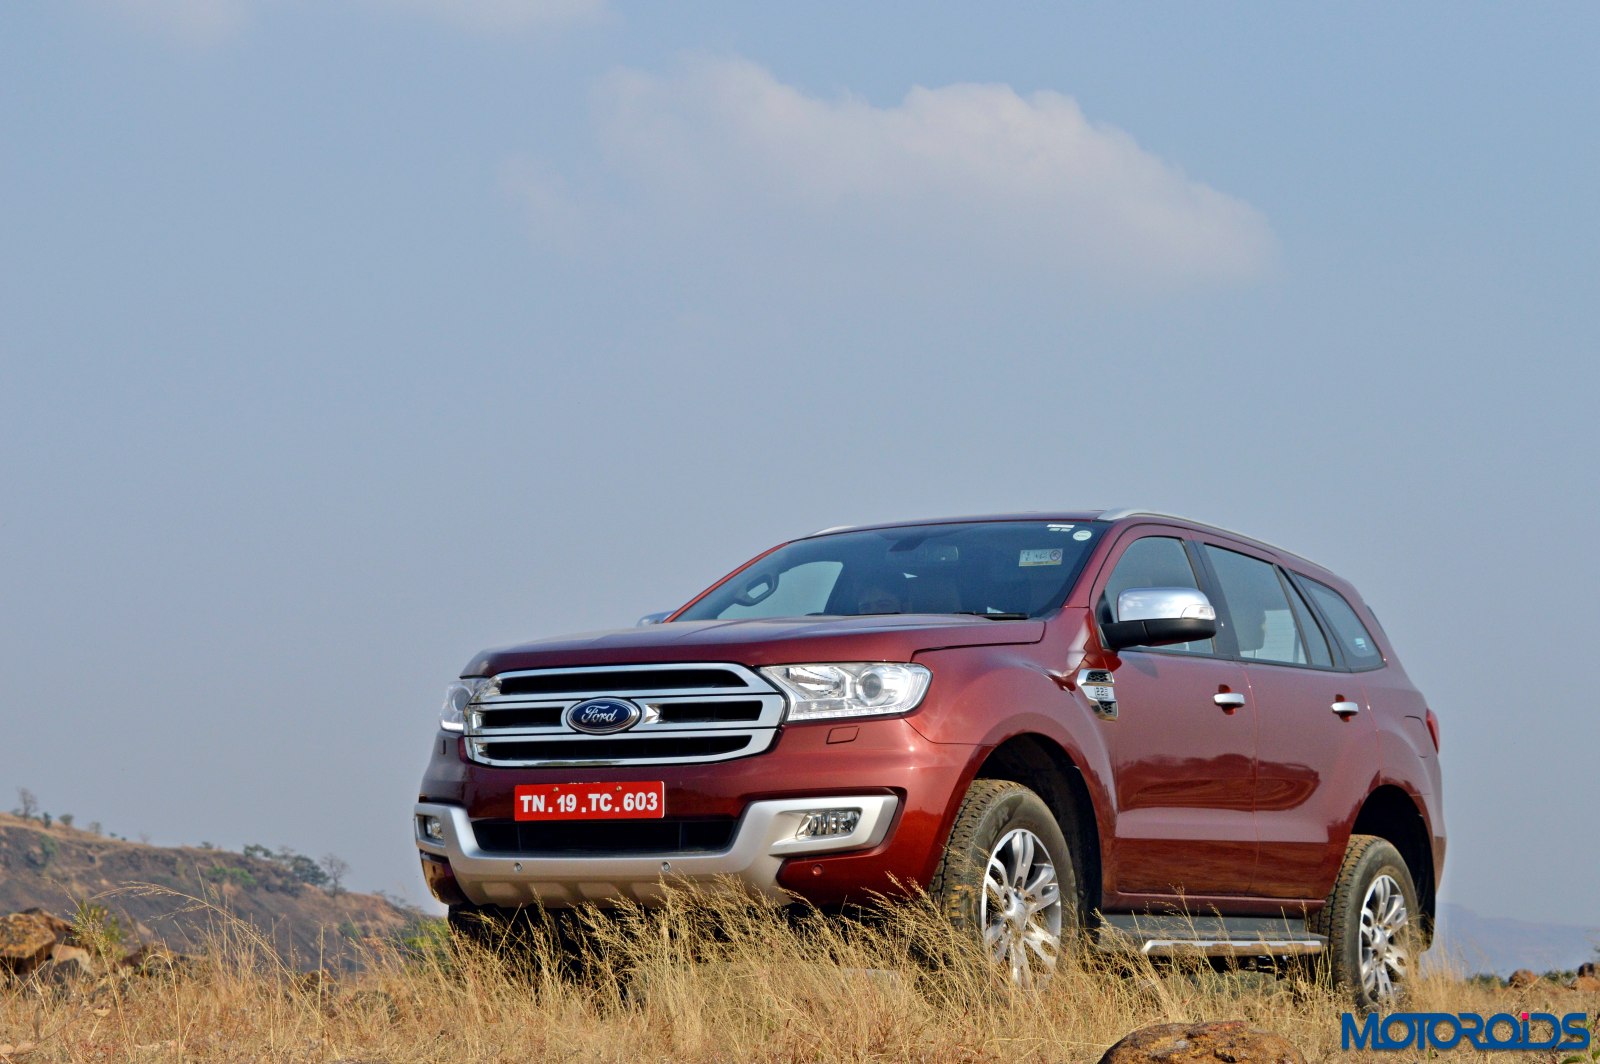 new 2016 Ford Endeavour india review (36)